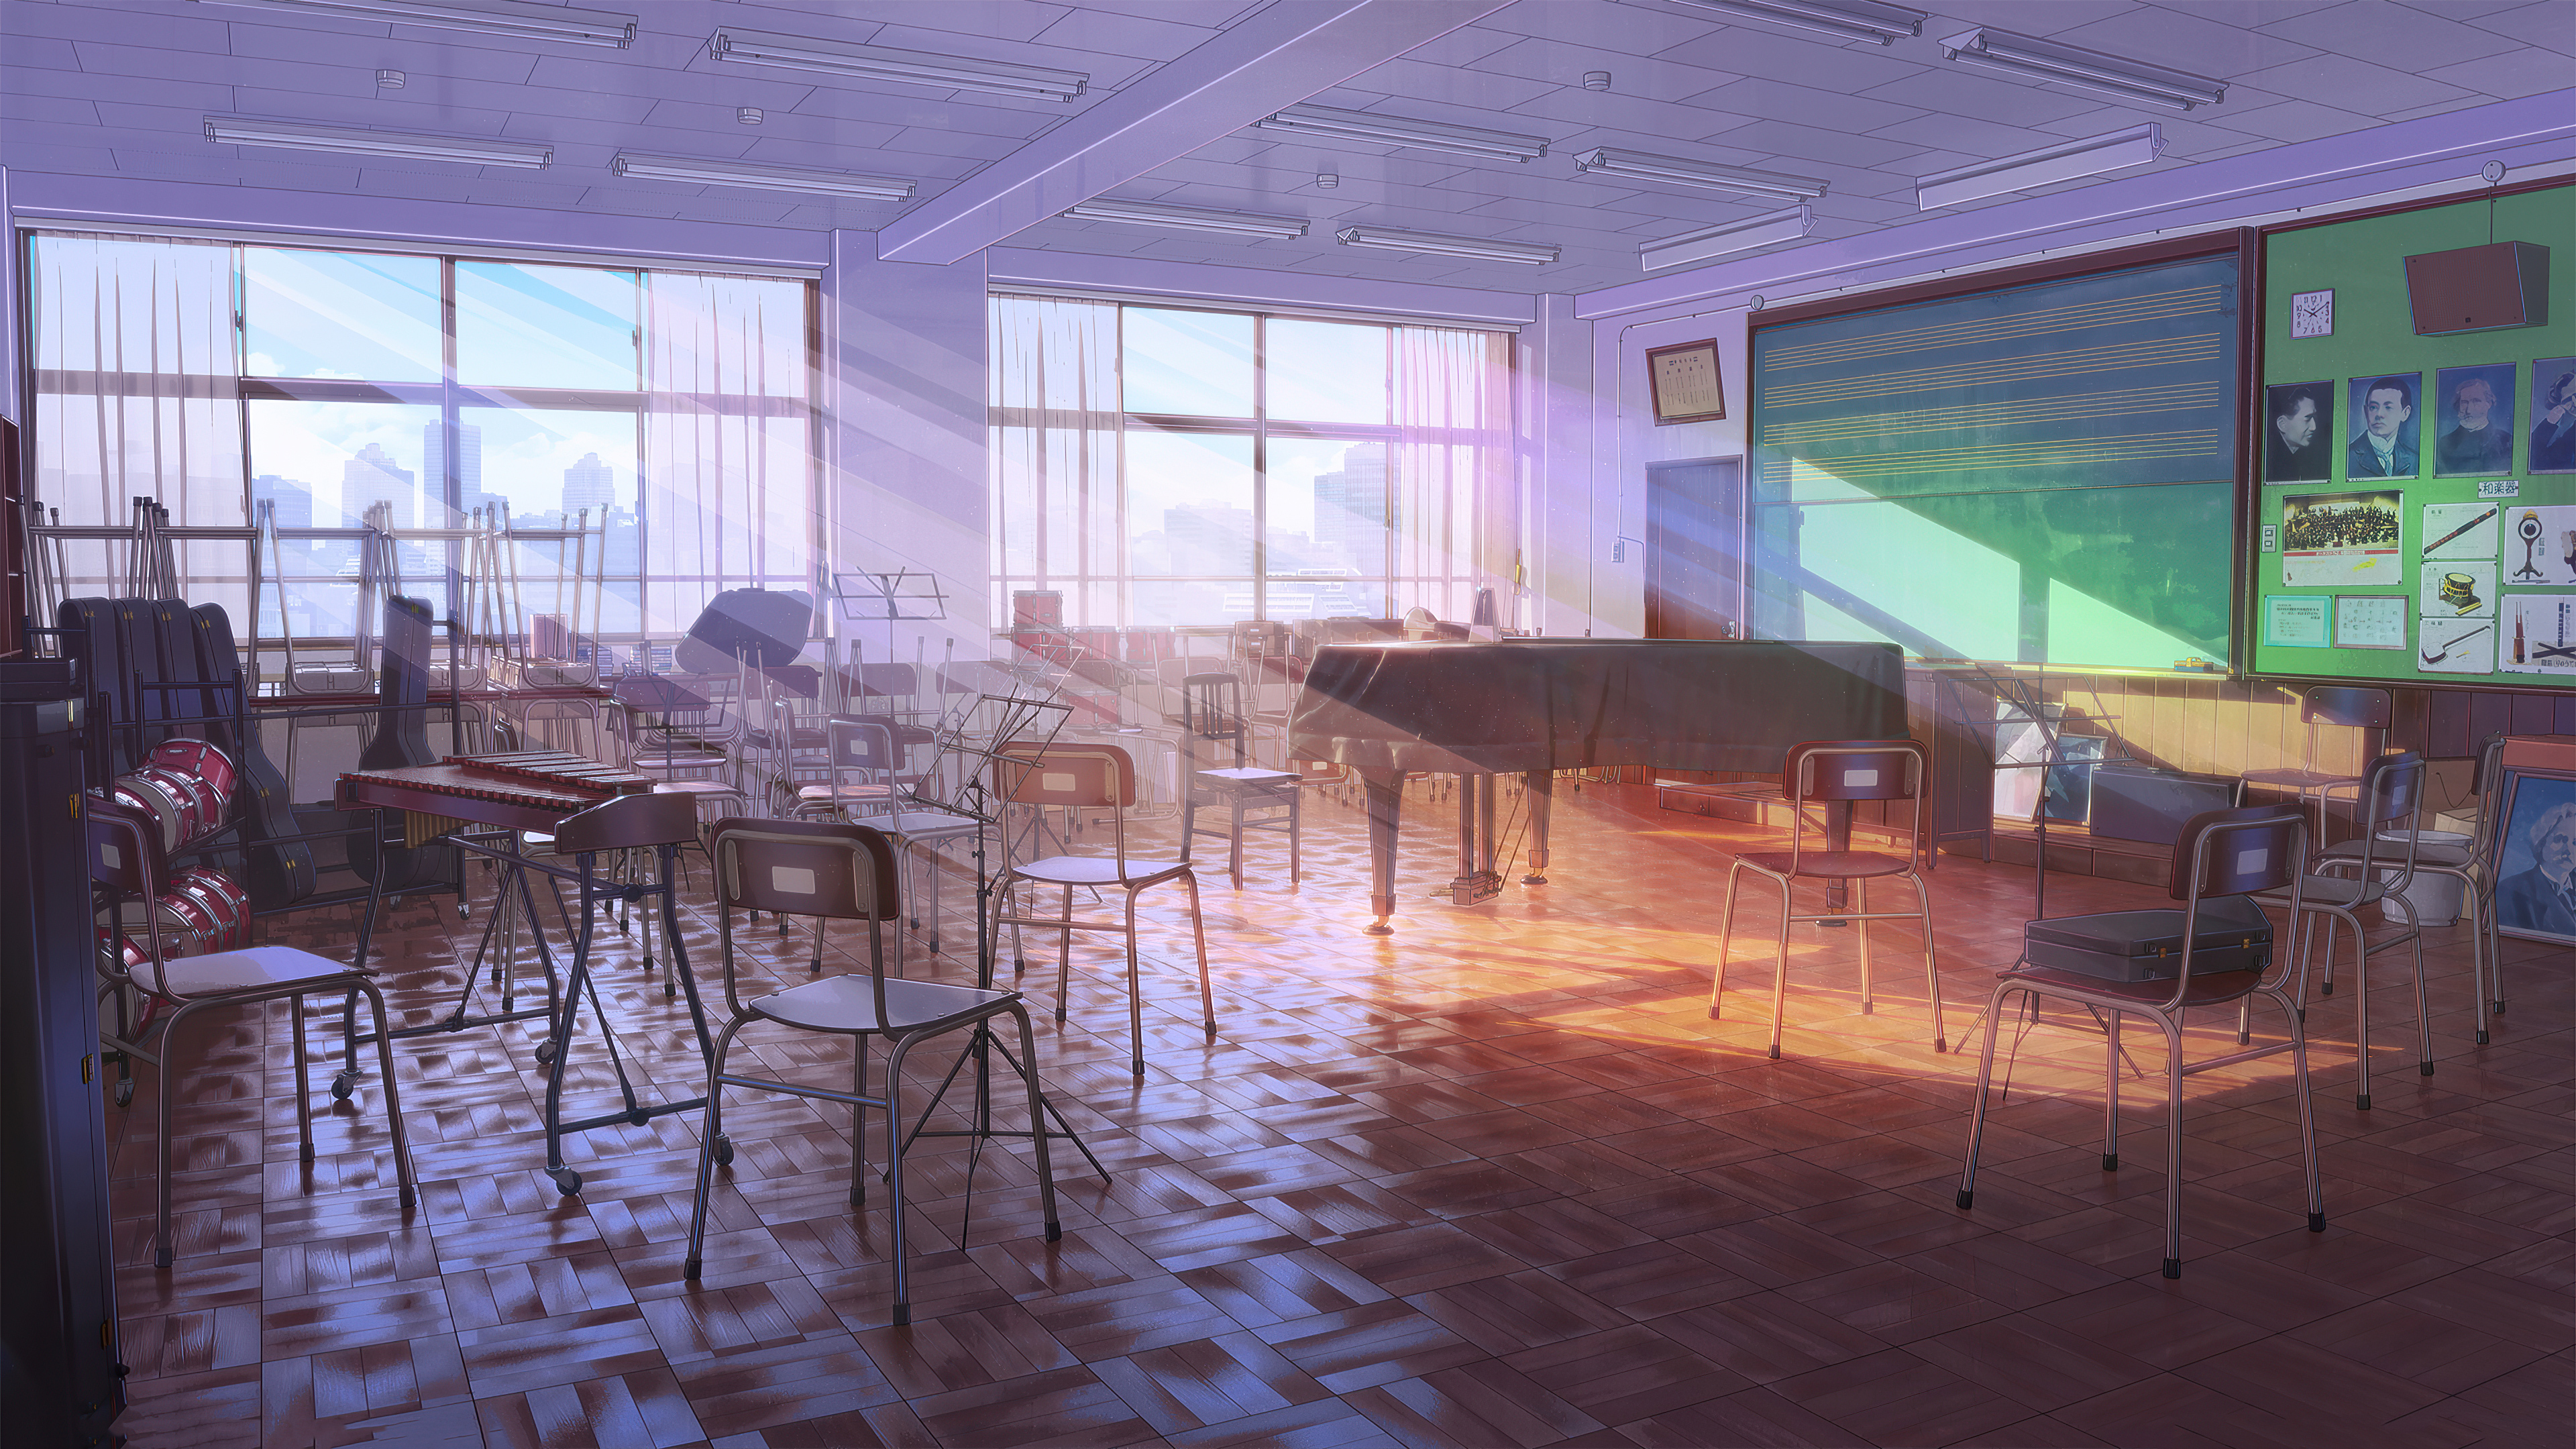 School Cleaning Anime Wind Activity Poster Background Material Wallpaper  Image For Free Download  Pngtree